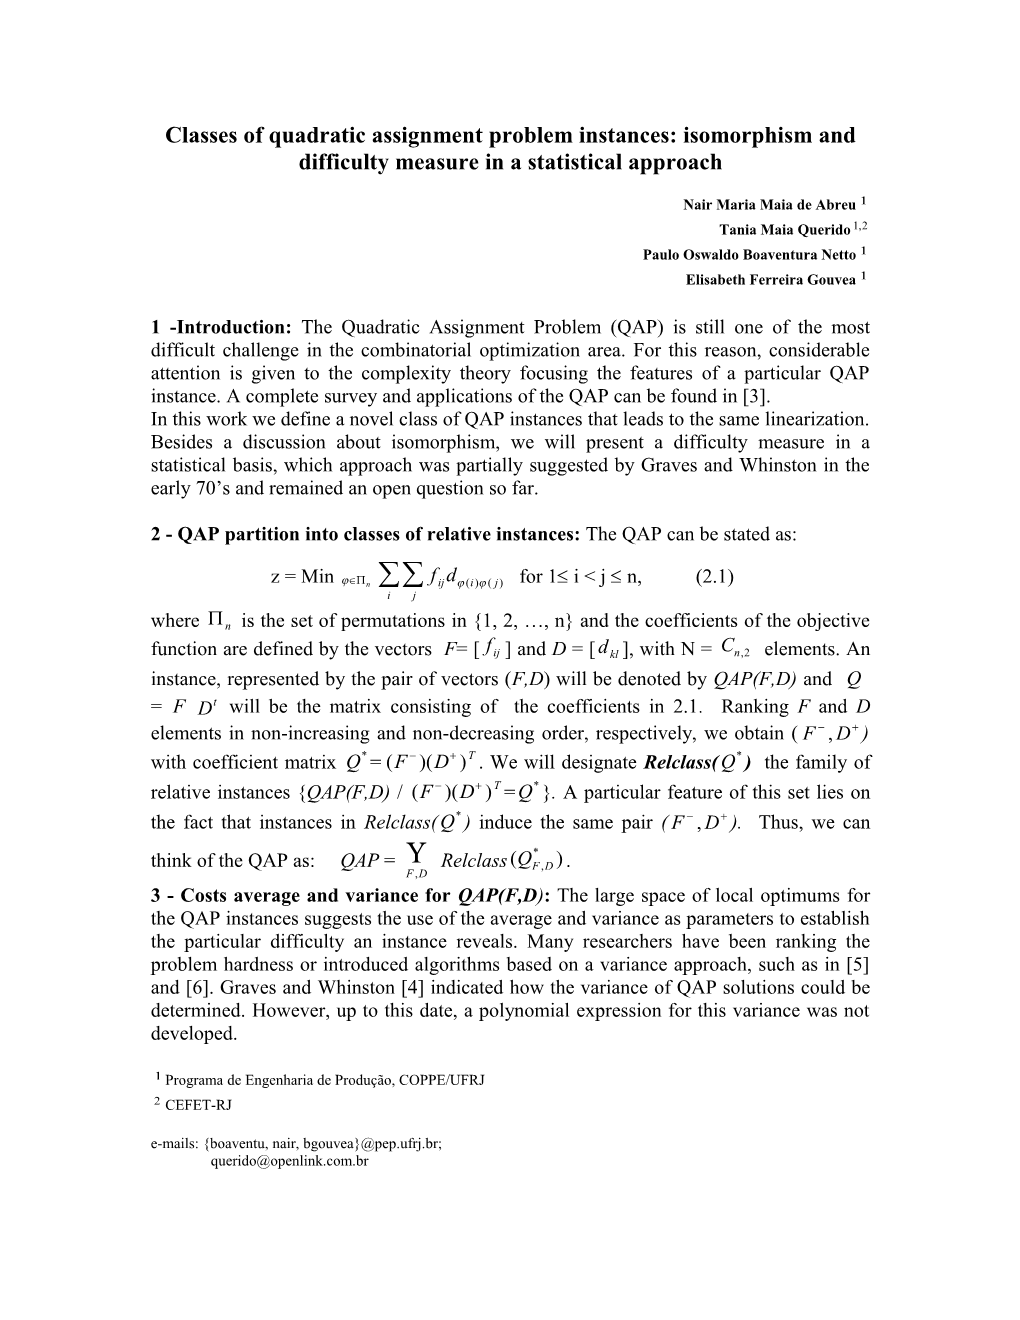 On the Use of Variance in Complexity Measures for the Quadratic Assignment